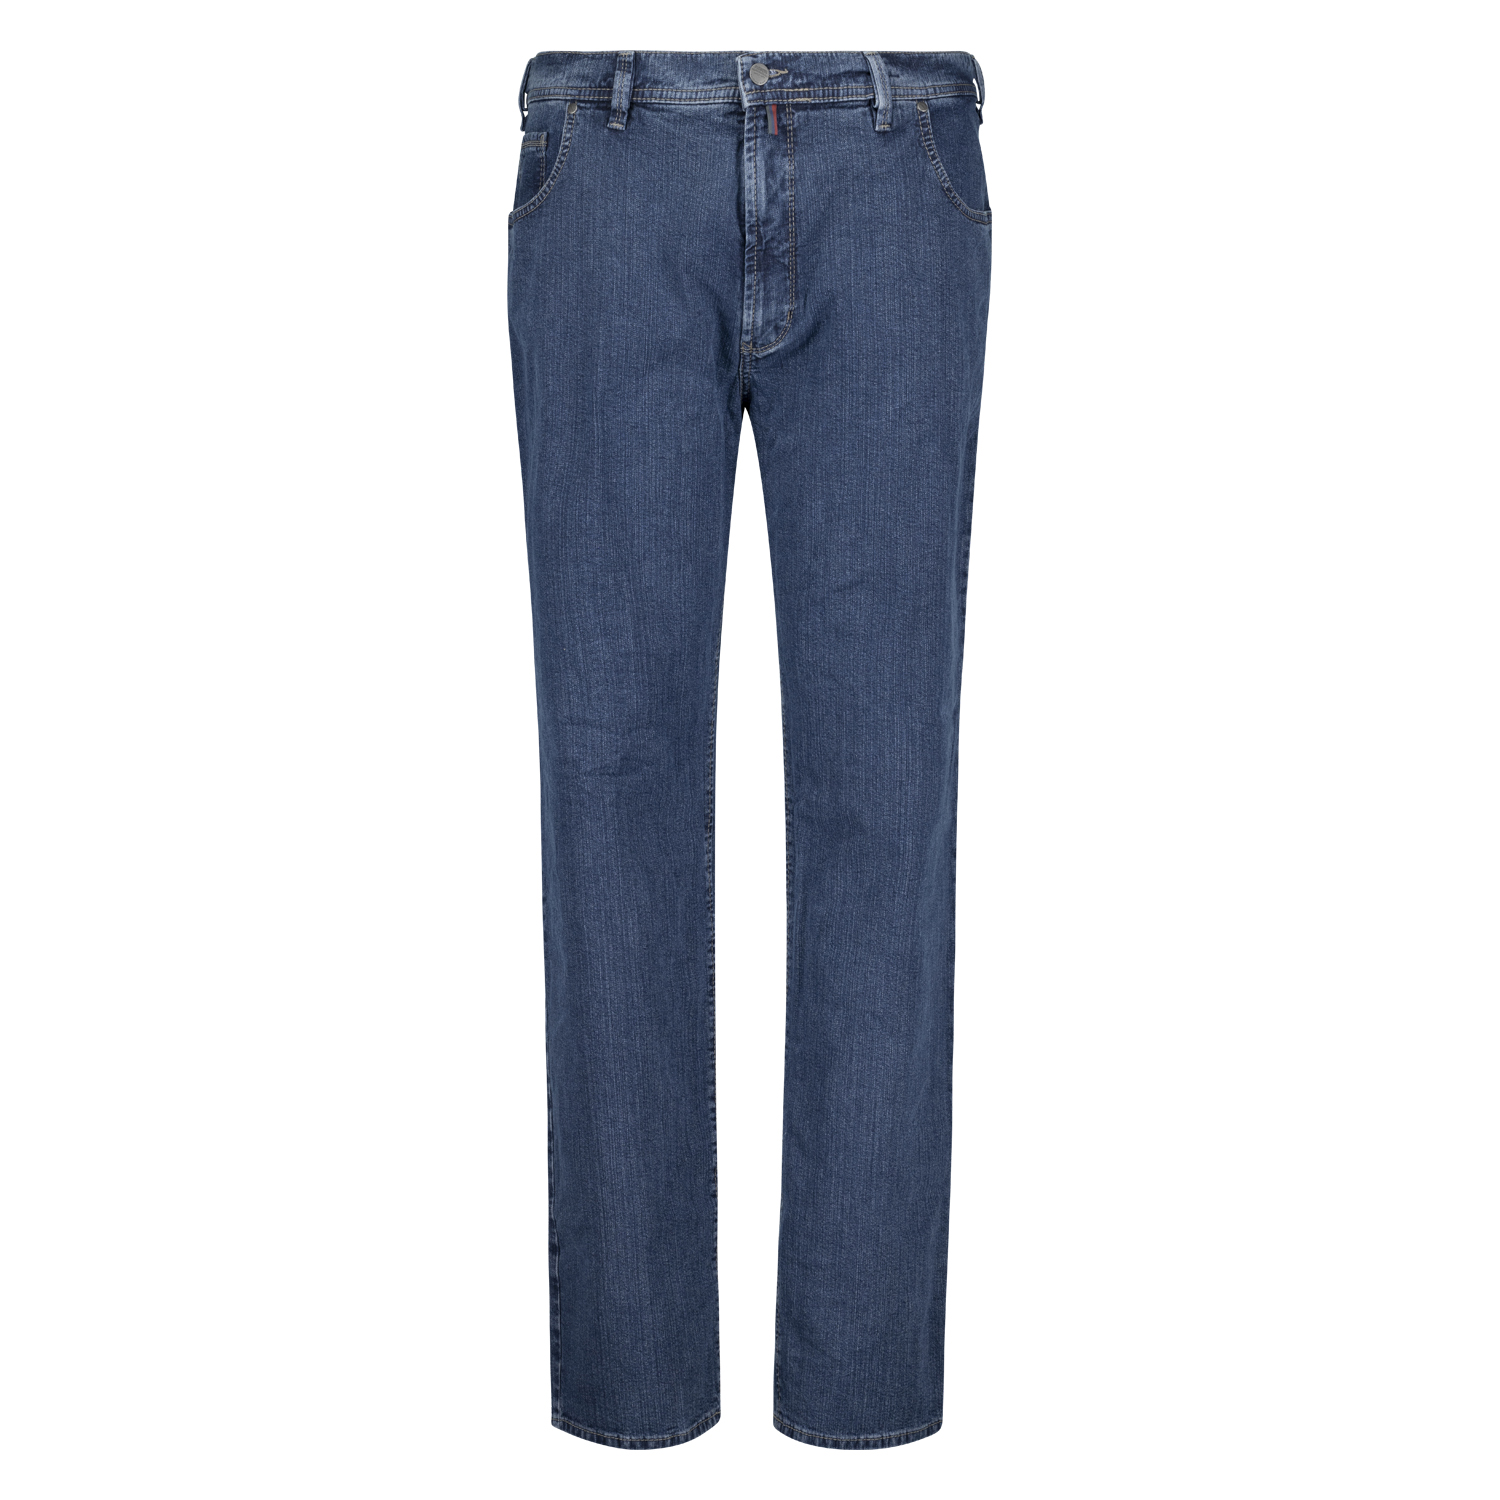 Five pocket jeans model "Peter" by Pioneer in oversize blue stonewash (low rise): 28 - 40